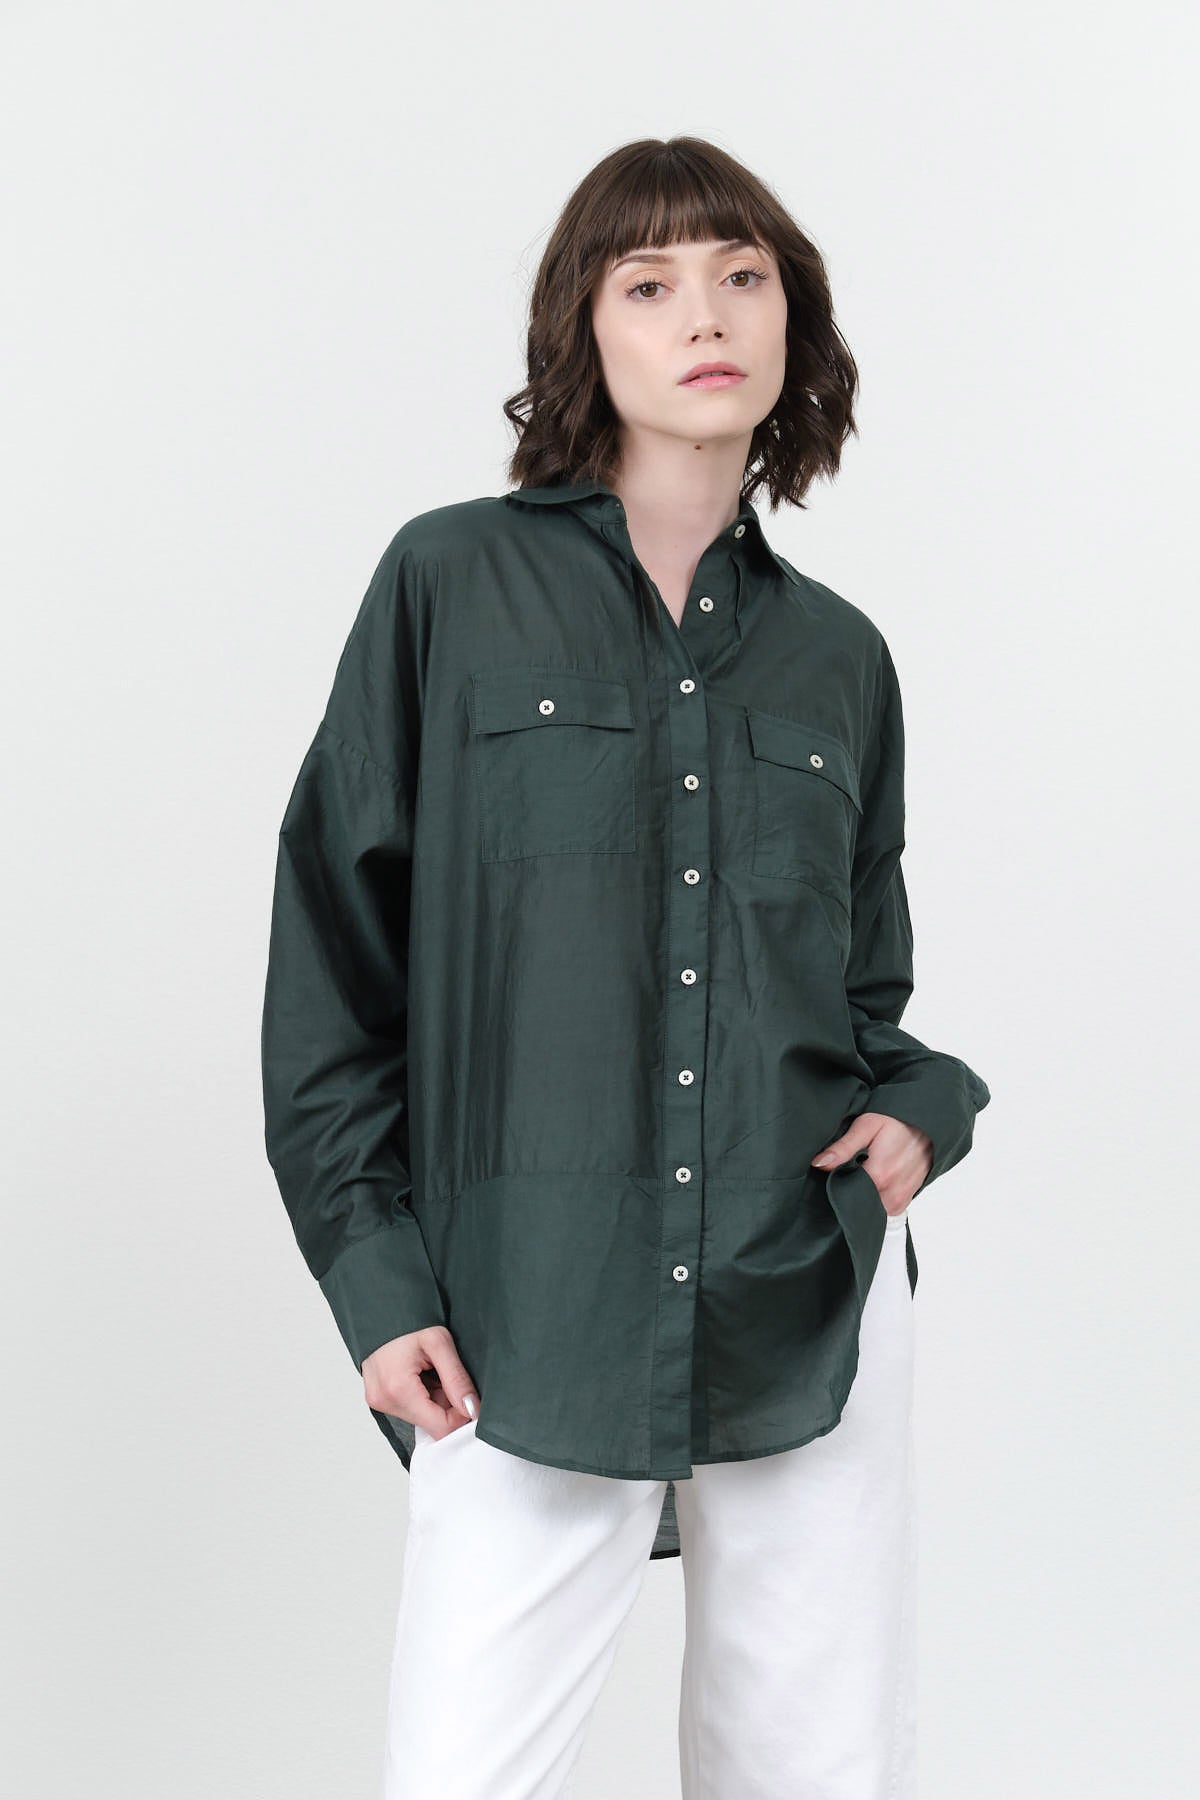 Mirth Kyoto Blouse in Palm